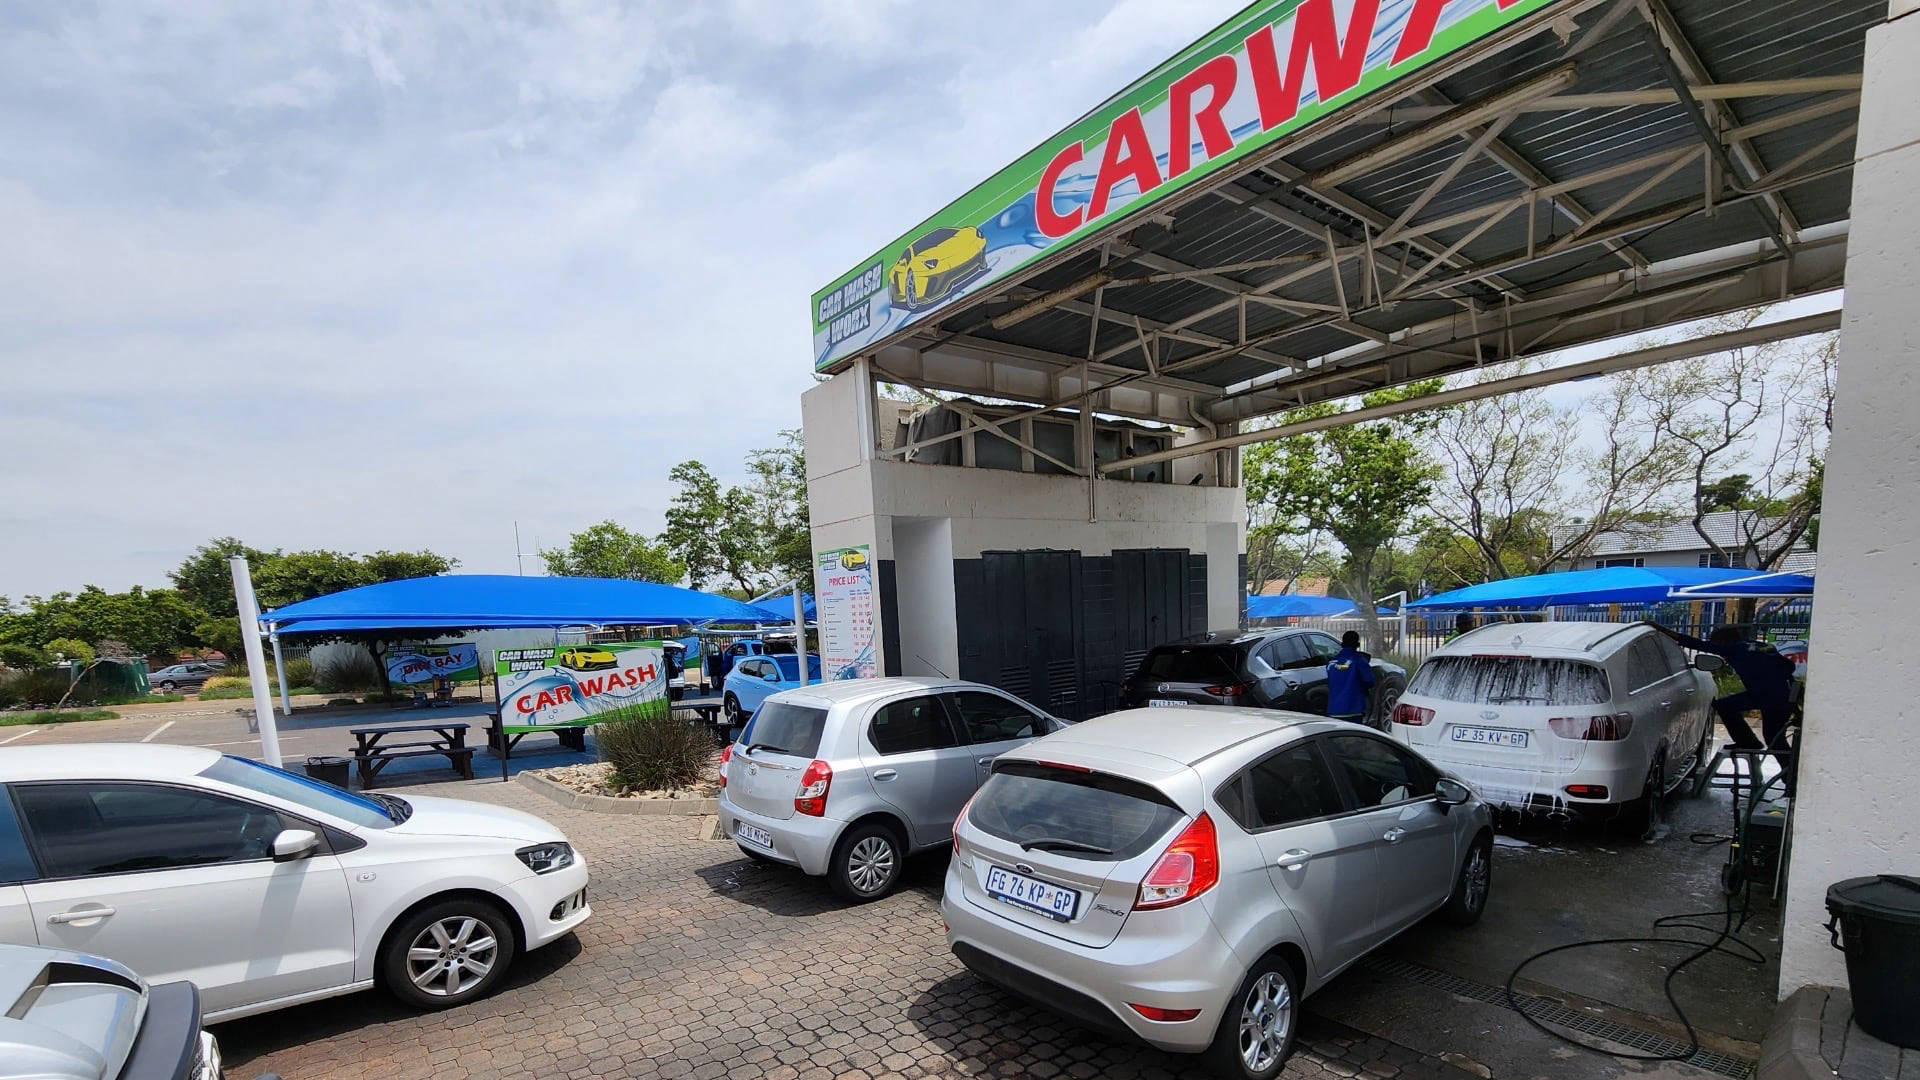 Randridge Mall CarWash Worx Branch, Car Wash Franchises Available, CarWash Worx Head Office, Join The Leading Car Wash Franchising Group, Start Your Own Successful Car Wash Business Now